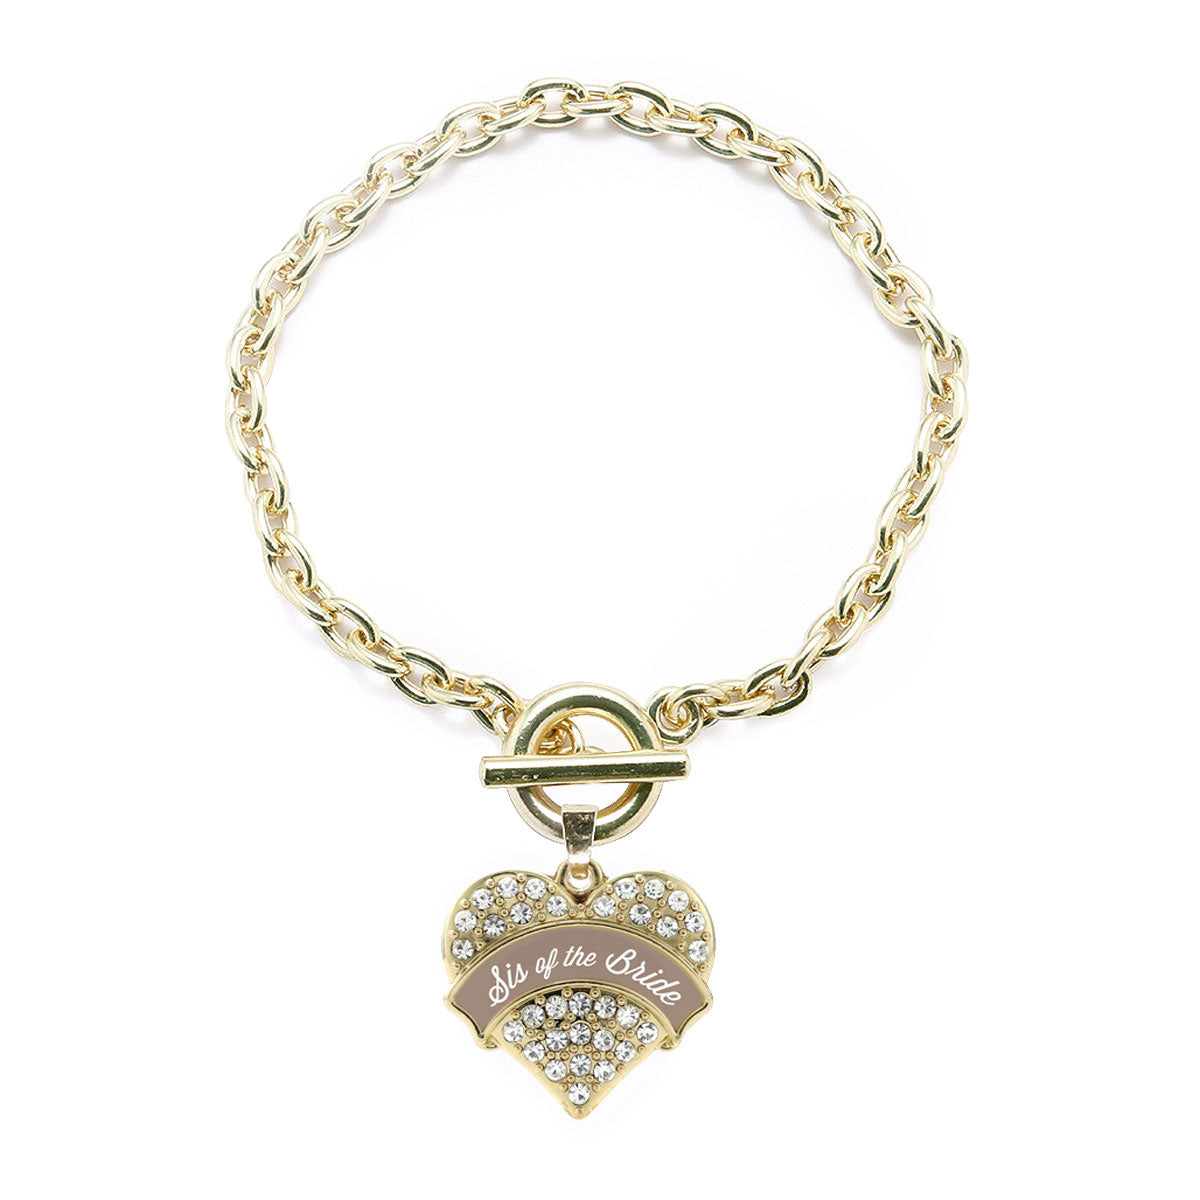 Gold Brown and White Sis of the Bride Pave Heart Charm Toggle Bracelet